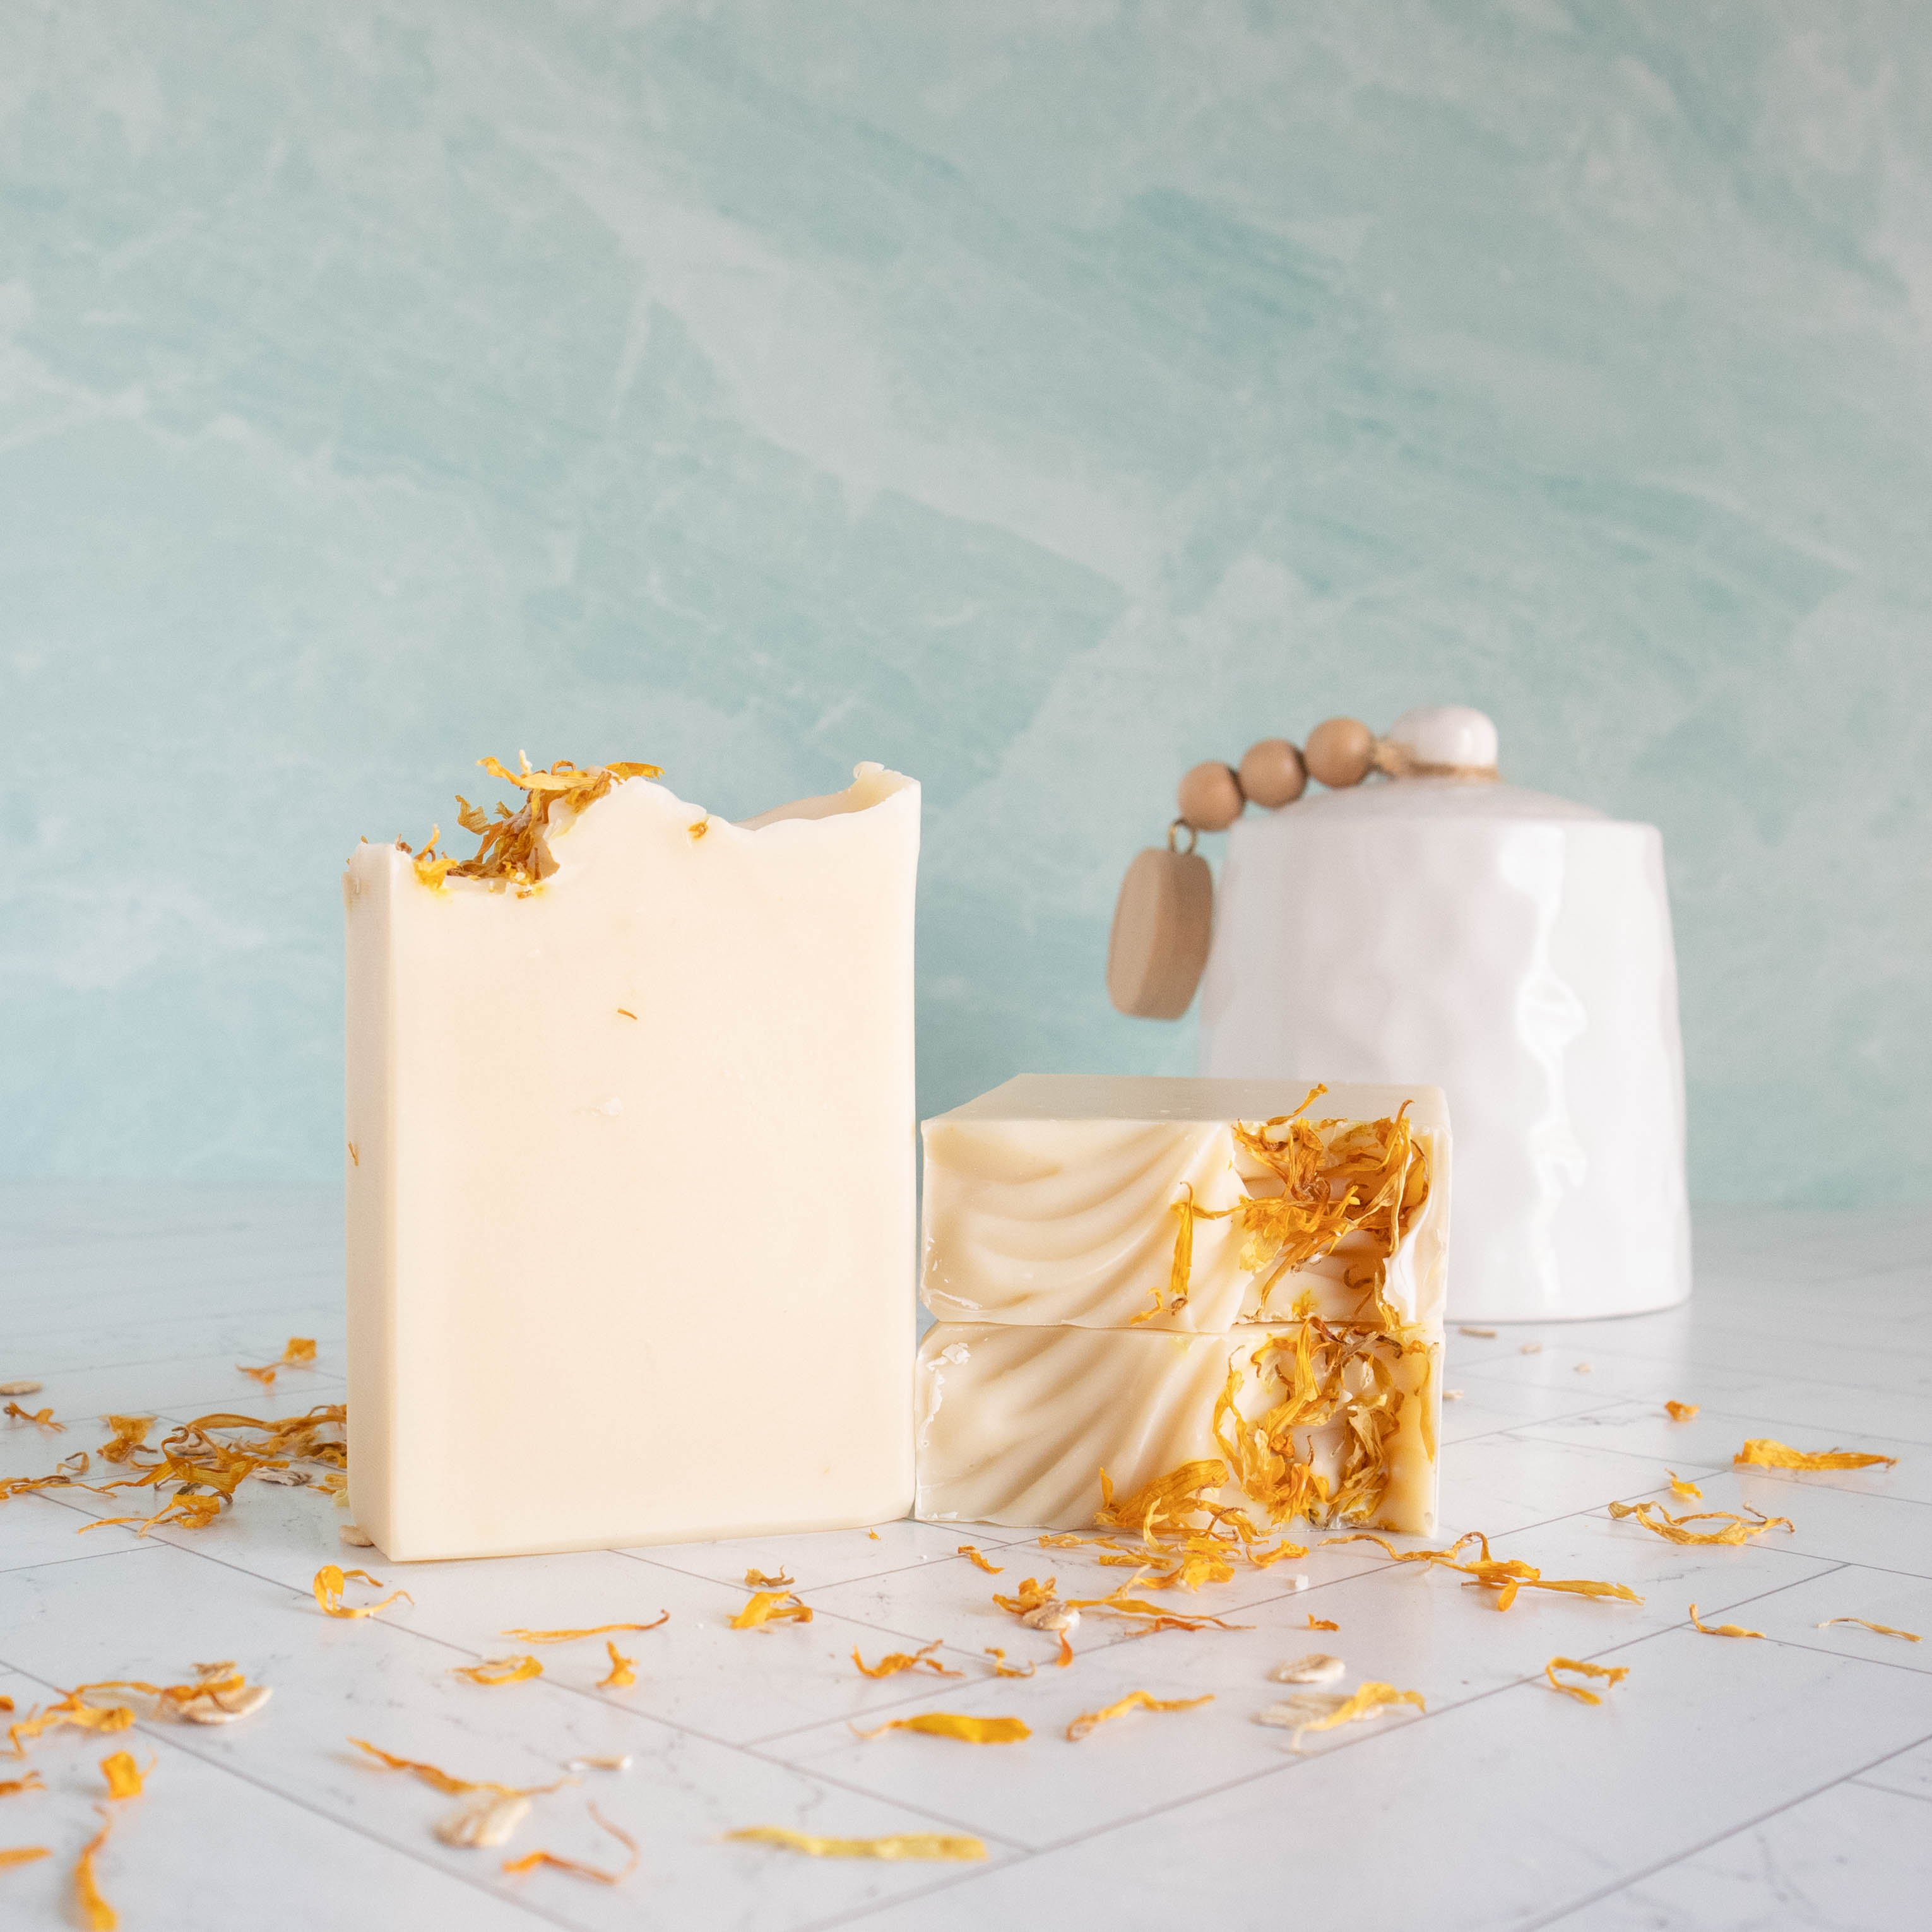 a bar of our soothing calendula soap is standing showing the creamy white soap. No swirls with this one, just creamy goodness. there are two other bars laying flat showing the tops that have some texture and then some calendula petals to give interest. there is a white crock in the background, a green wall in the background and on the surface are scattered calendula petals.